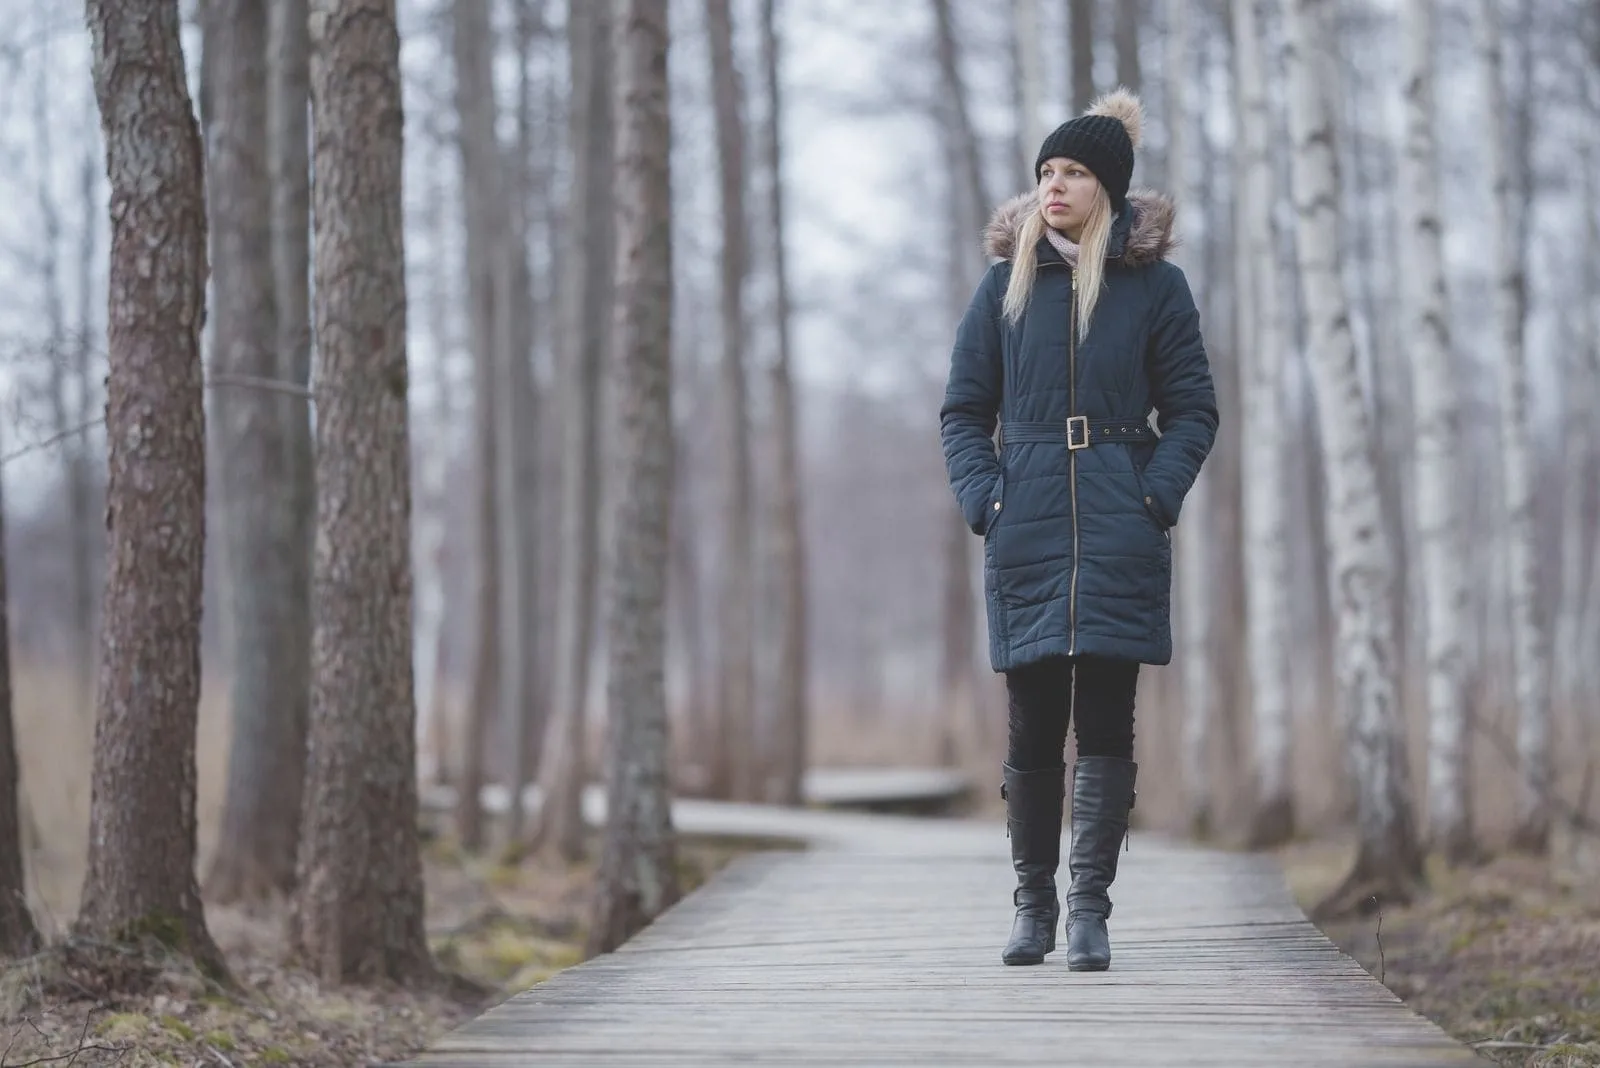 young woman in dark warm clothes walking in wooden trail of a peaceful park